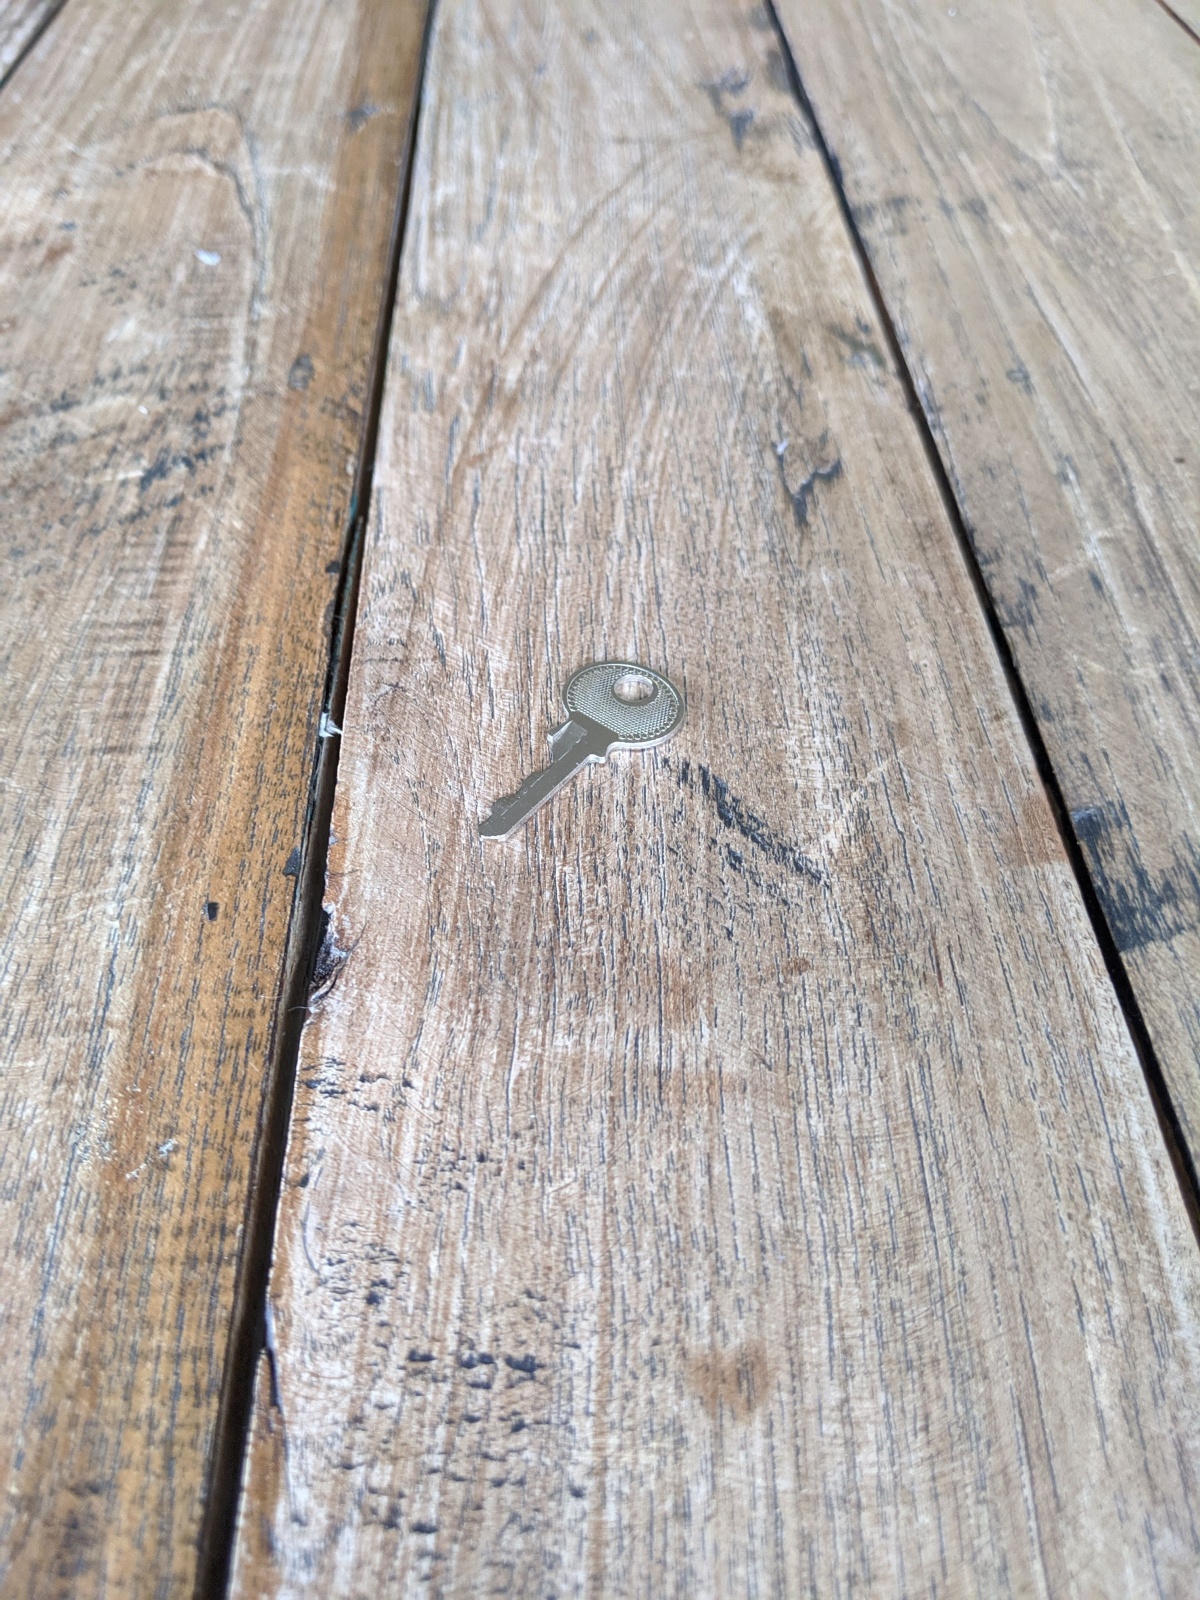 A key on a wooden outdoor pub table